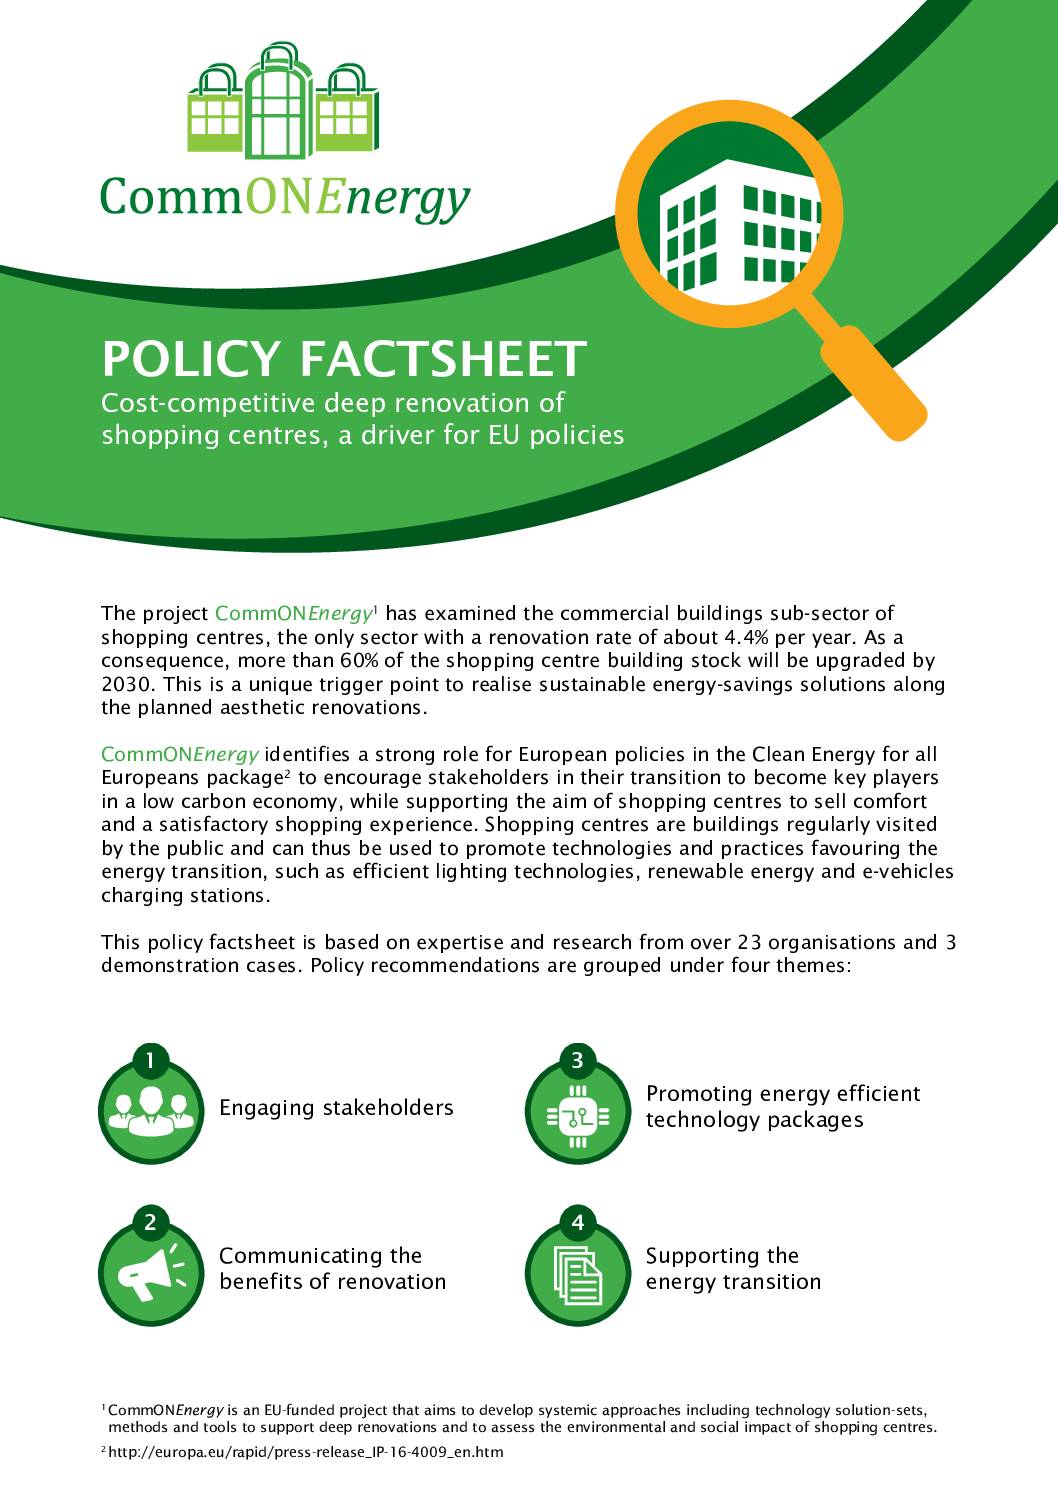 CommONEnergy policy factsheet: Cost-competitive deep renovation of shopping centres, a driver for EU policies